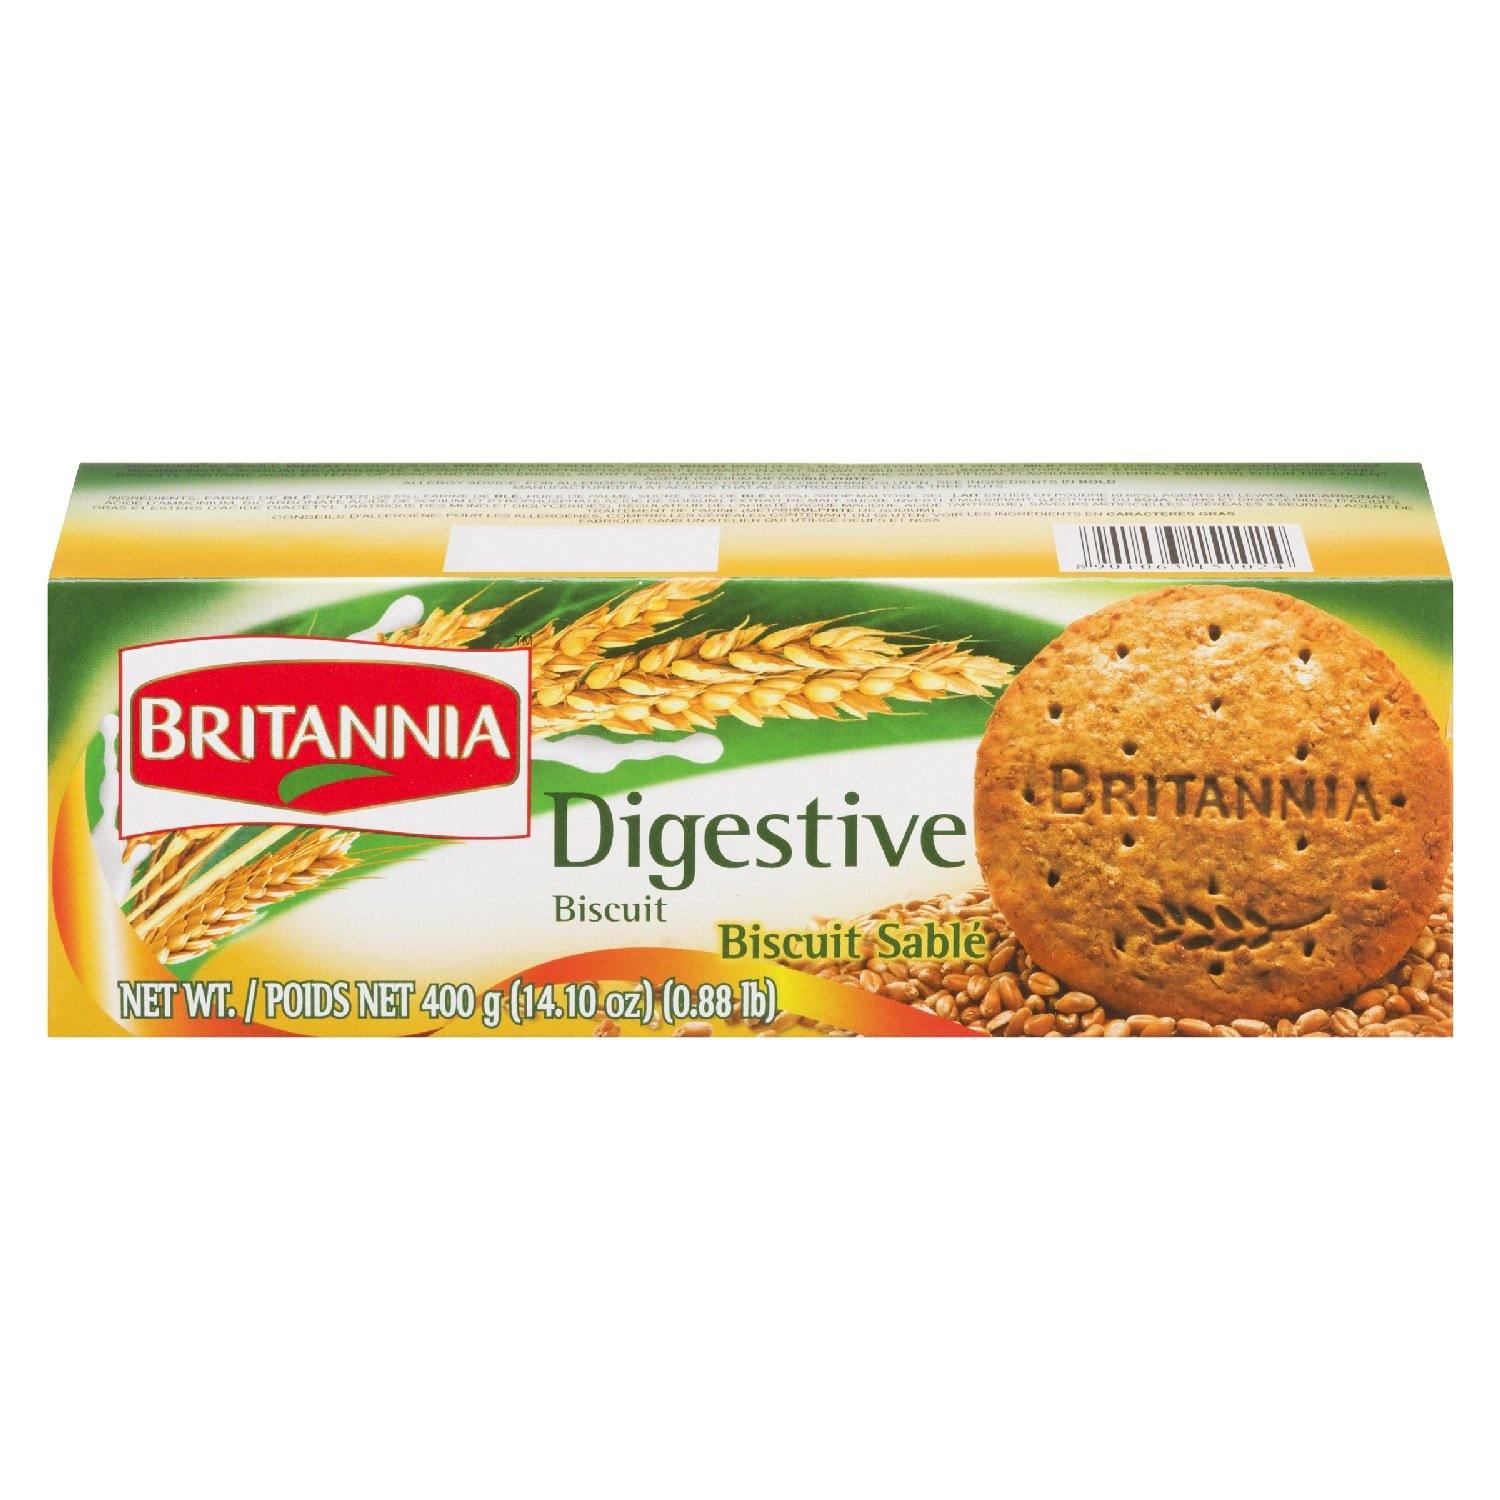 Britannia Digestive Biscuits 400G - Cartly - Indian Grocery Store